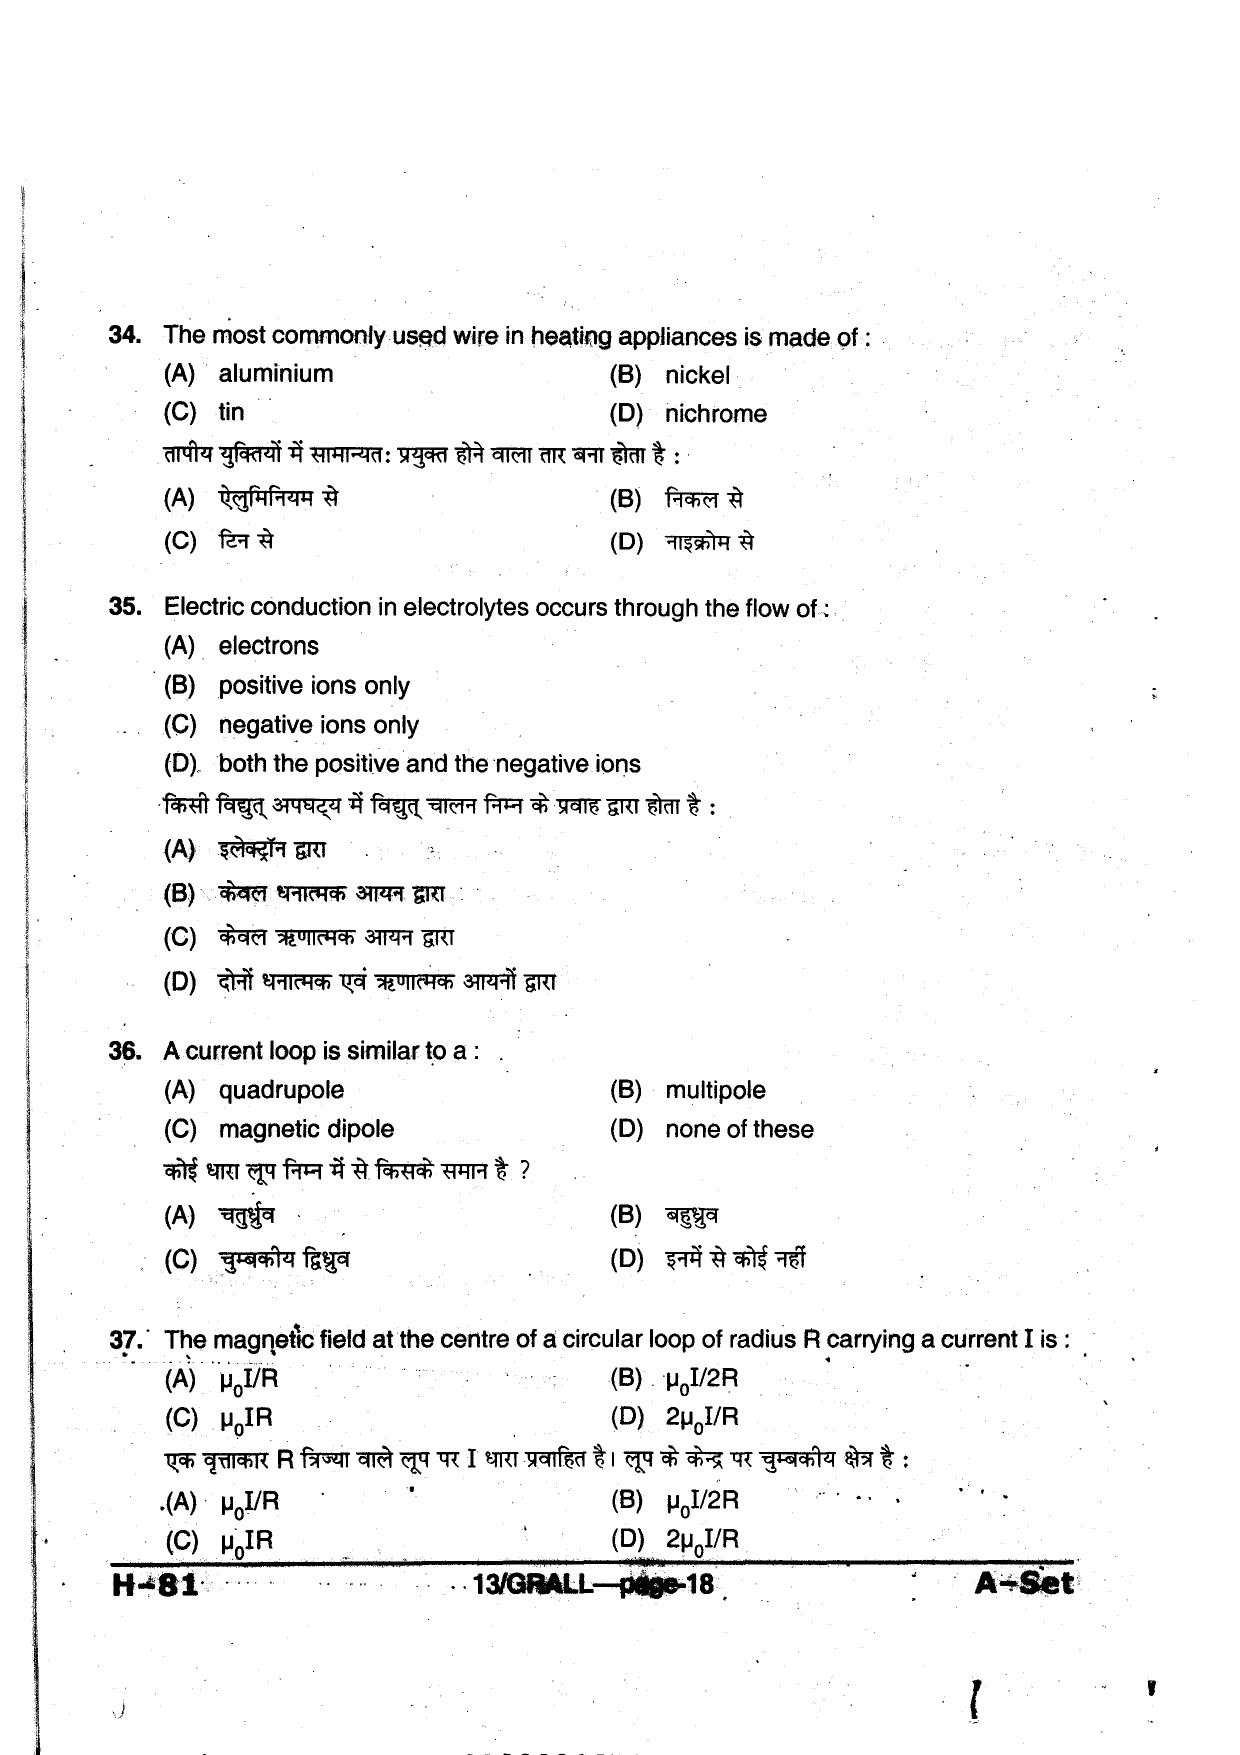 MP PAT 2013 Question Paper - Paper I - Page 18